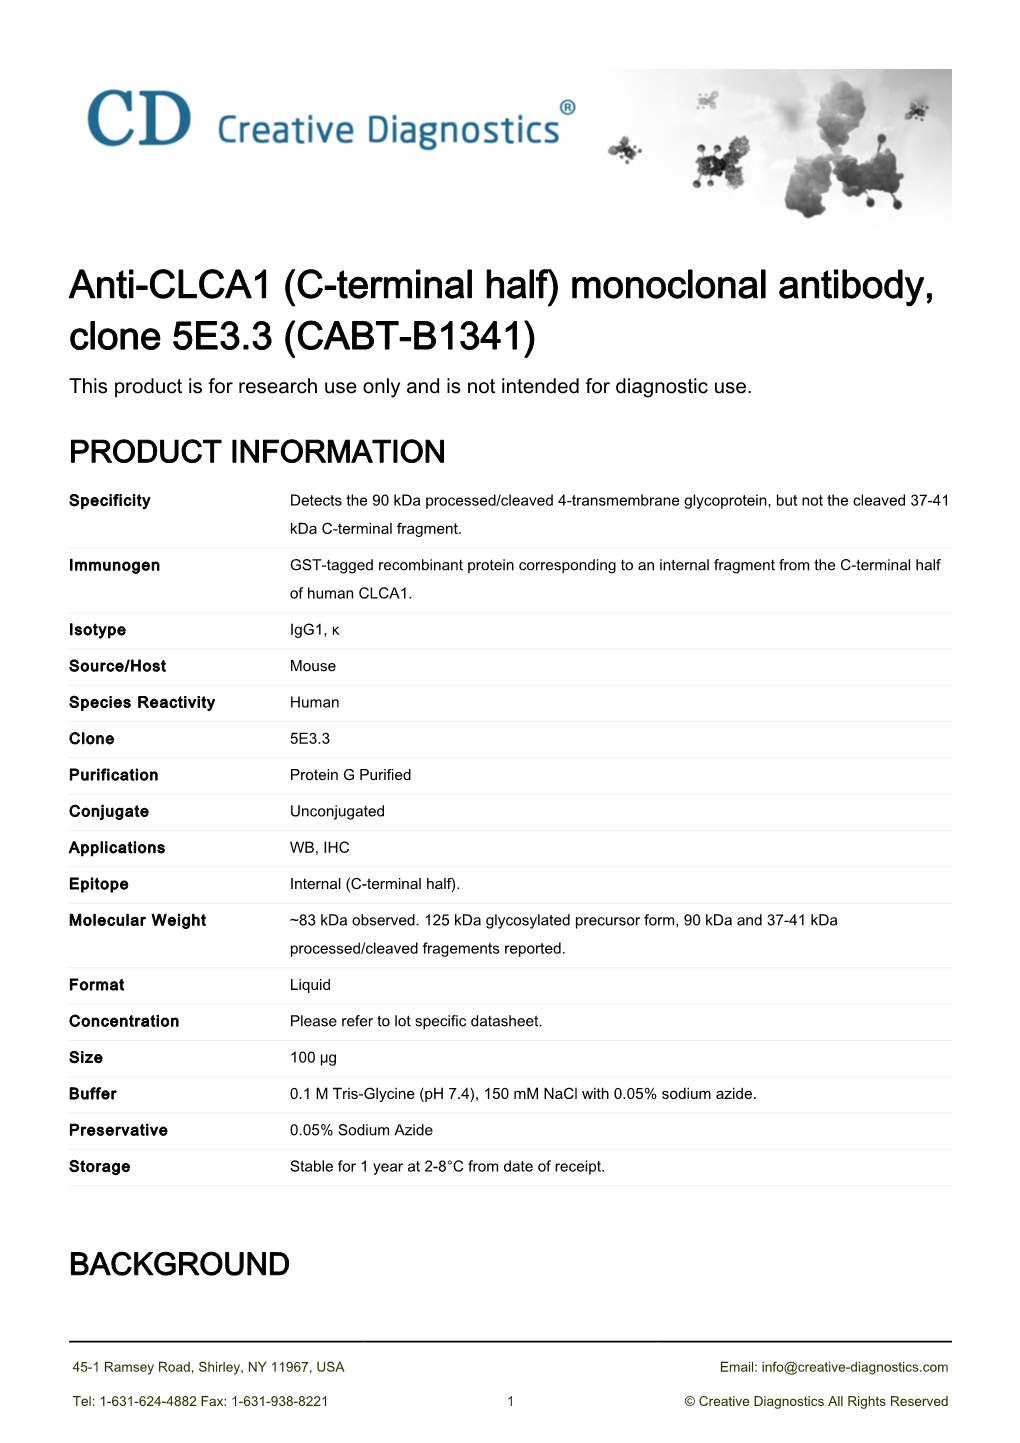 Anti-CLCA1 (C-Terminal Half) Monoclonal Antibody, Clone 5E3.3 (CABT-B1341) This Product Is for Research Use Only and Is Not Intended for Diagnostic Use